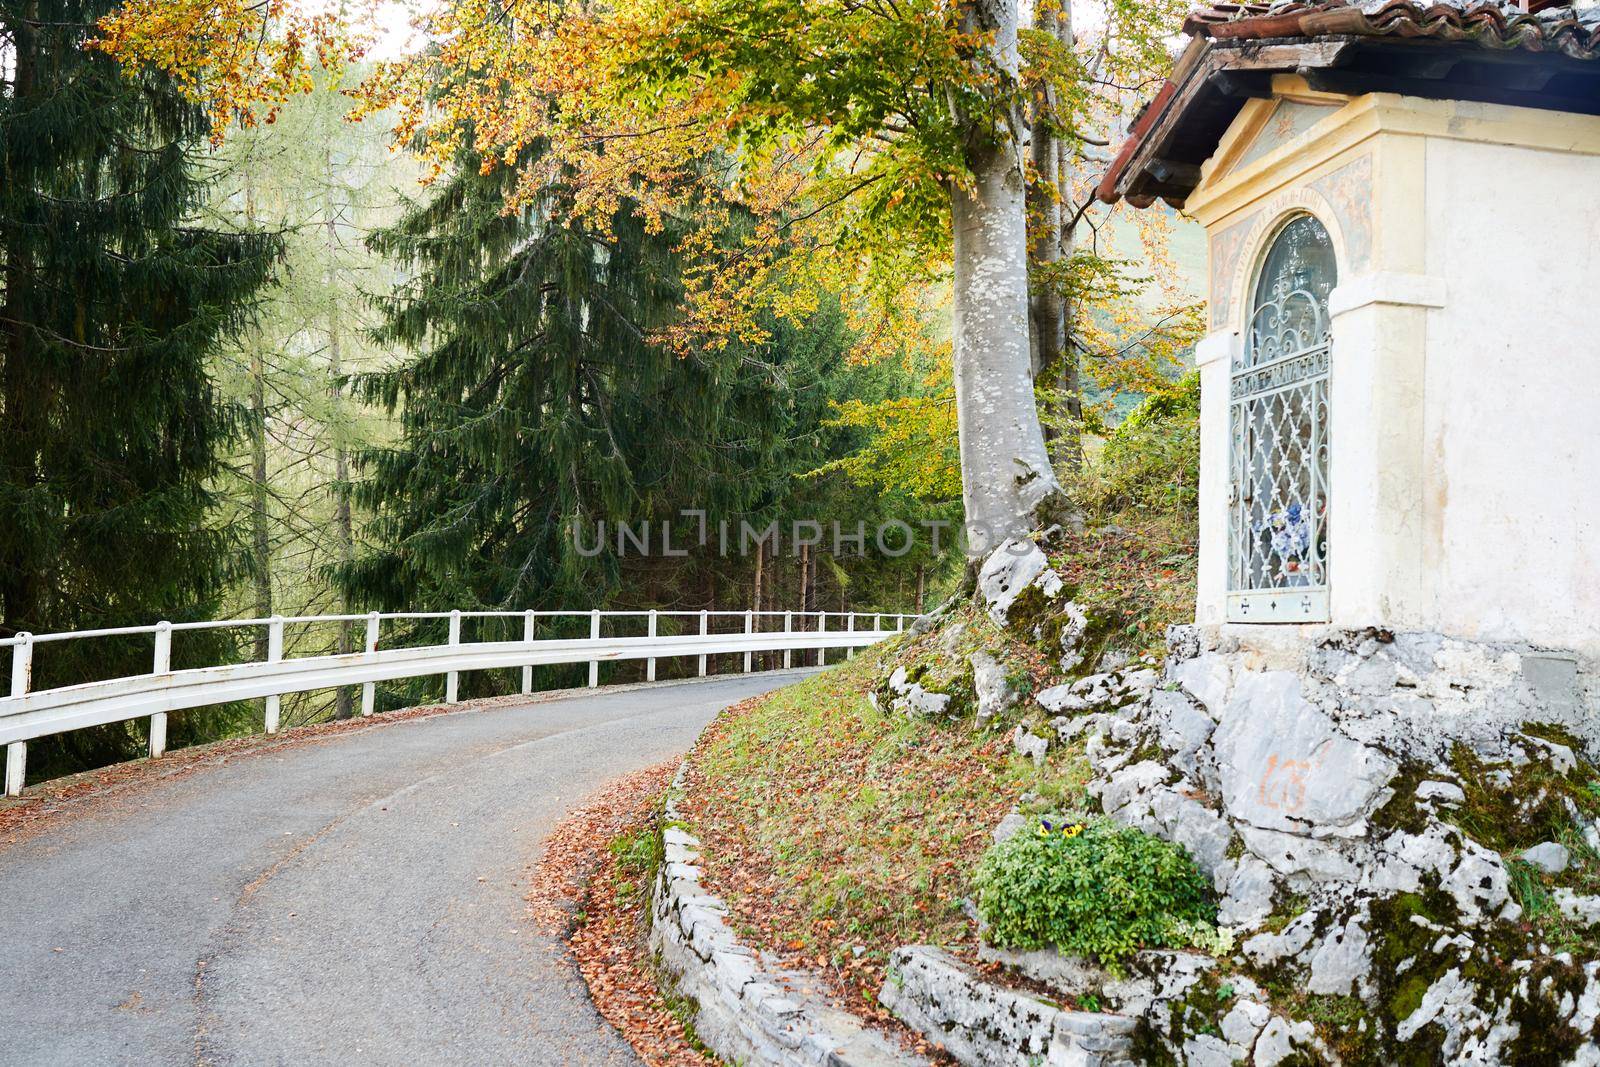 Picturesque Alps autumn landscape, serpentine mountain road in Lombardy, Italy. Colorful autumn scene by photolime